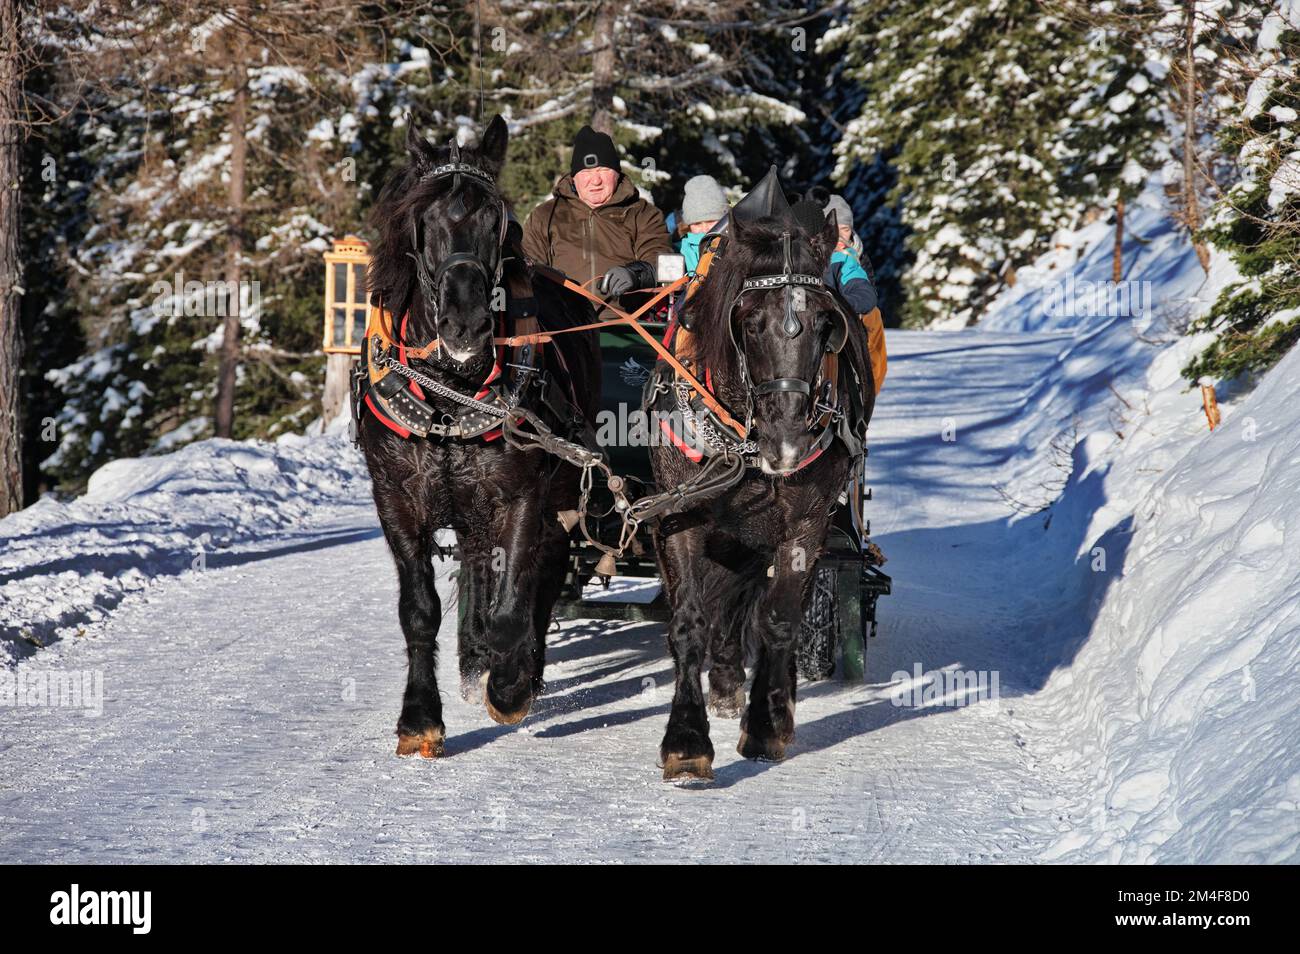 Horses pulled sledge through the forest, Austria Stock Photo